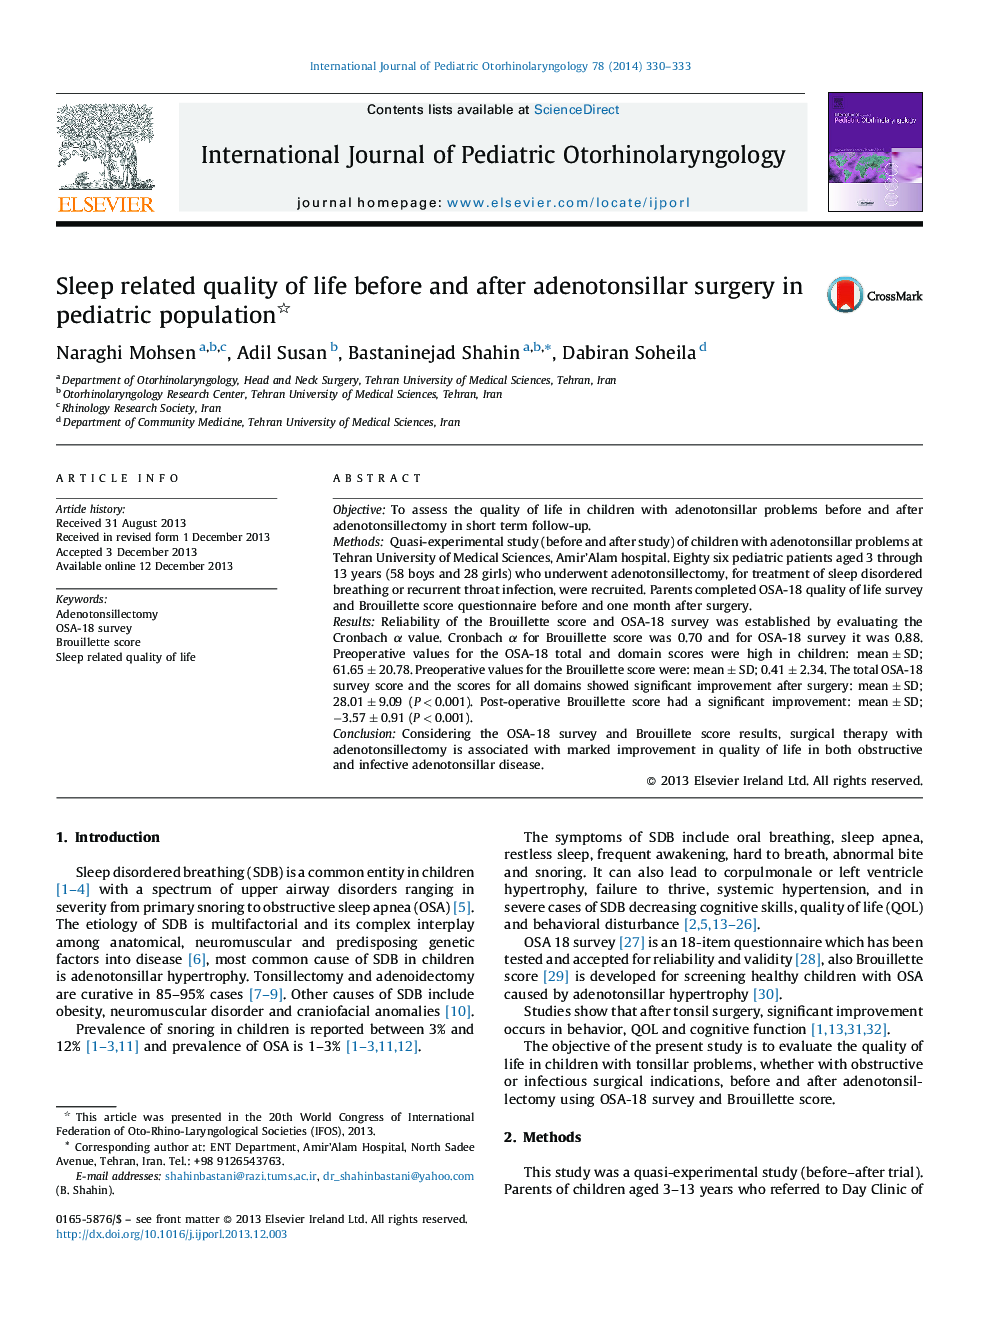 Sleep related quality of life before and after adenotonsillar surgery in pediatric population